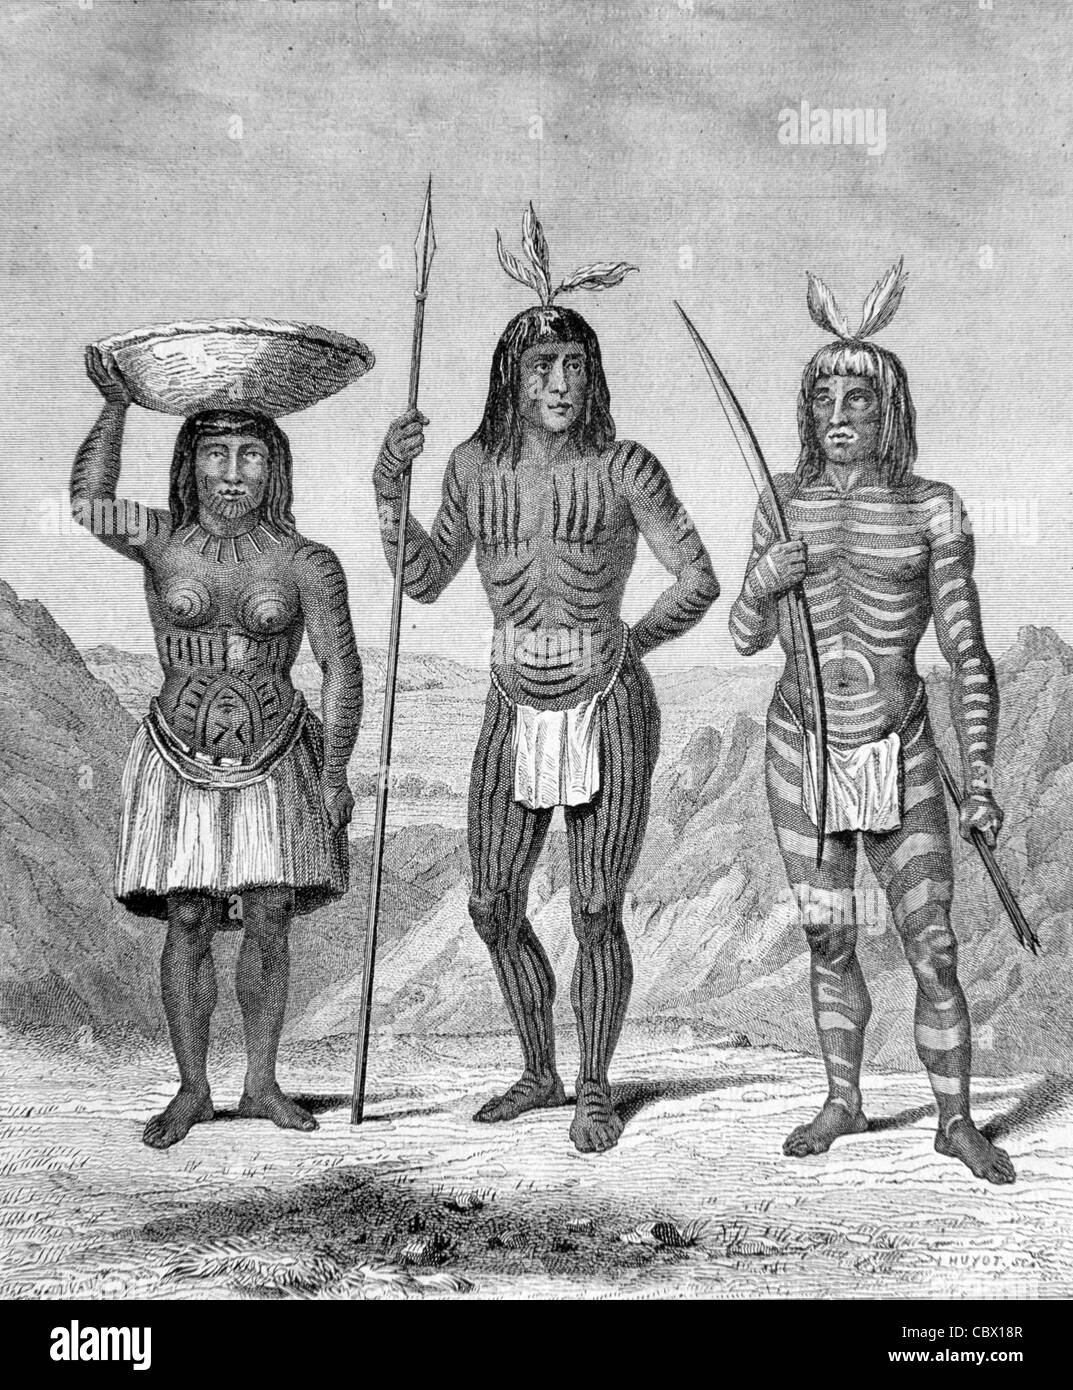 Mohave or Mojave Native American Indian People, Colorado, USA 1860 Engraving. With Body Scarification or Tattoos. Vintage Illustration or Engraving Stock Photo